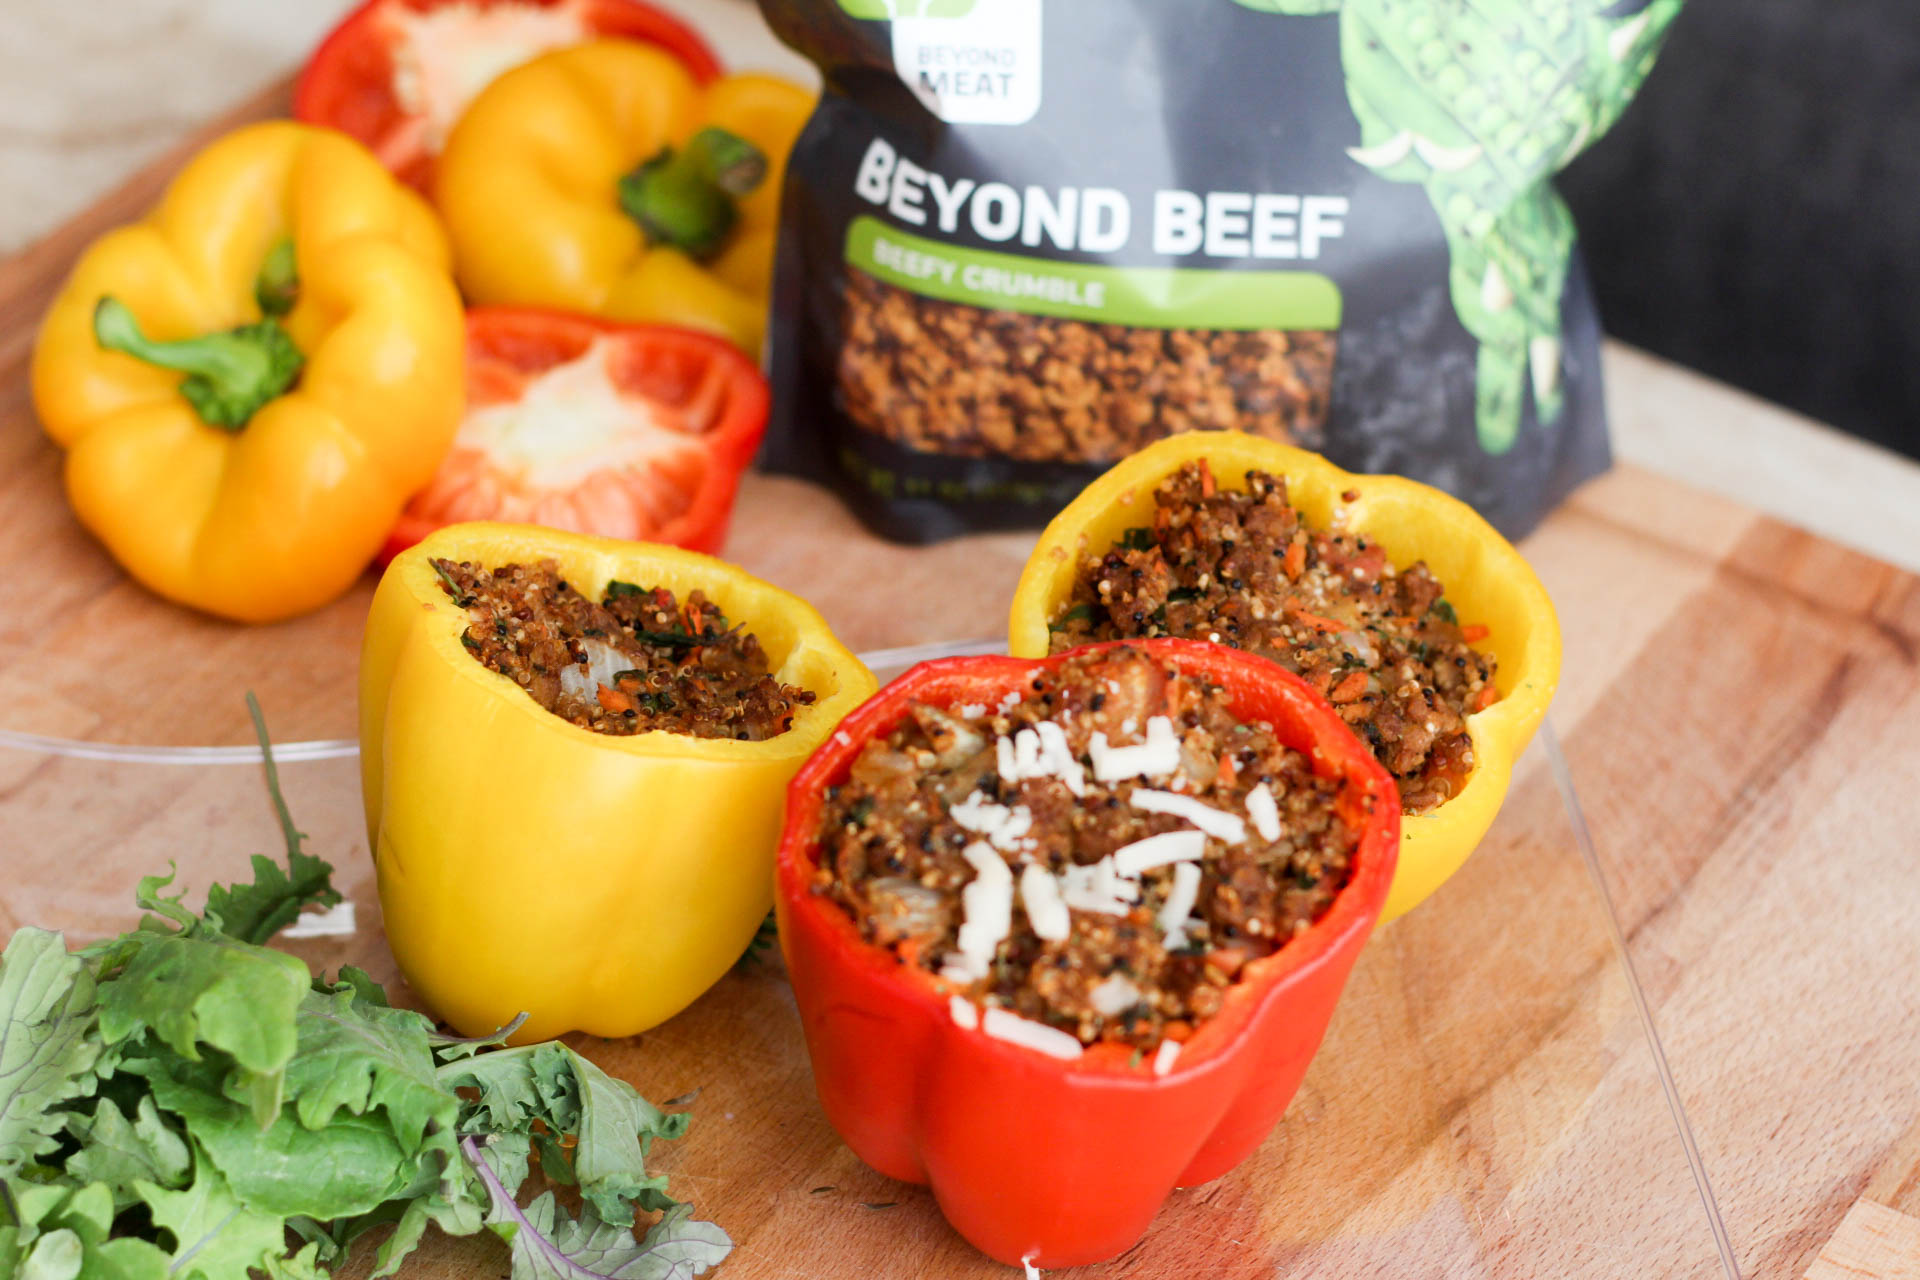 Quinoa Stuffed Bell Peppers - Beyond Beef Beefy Crumbles